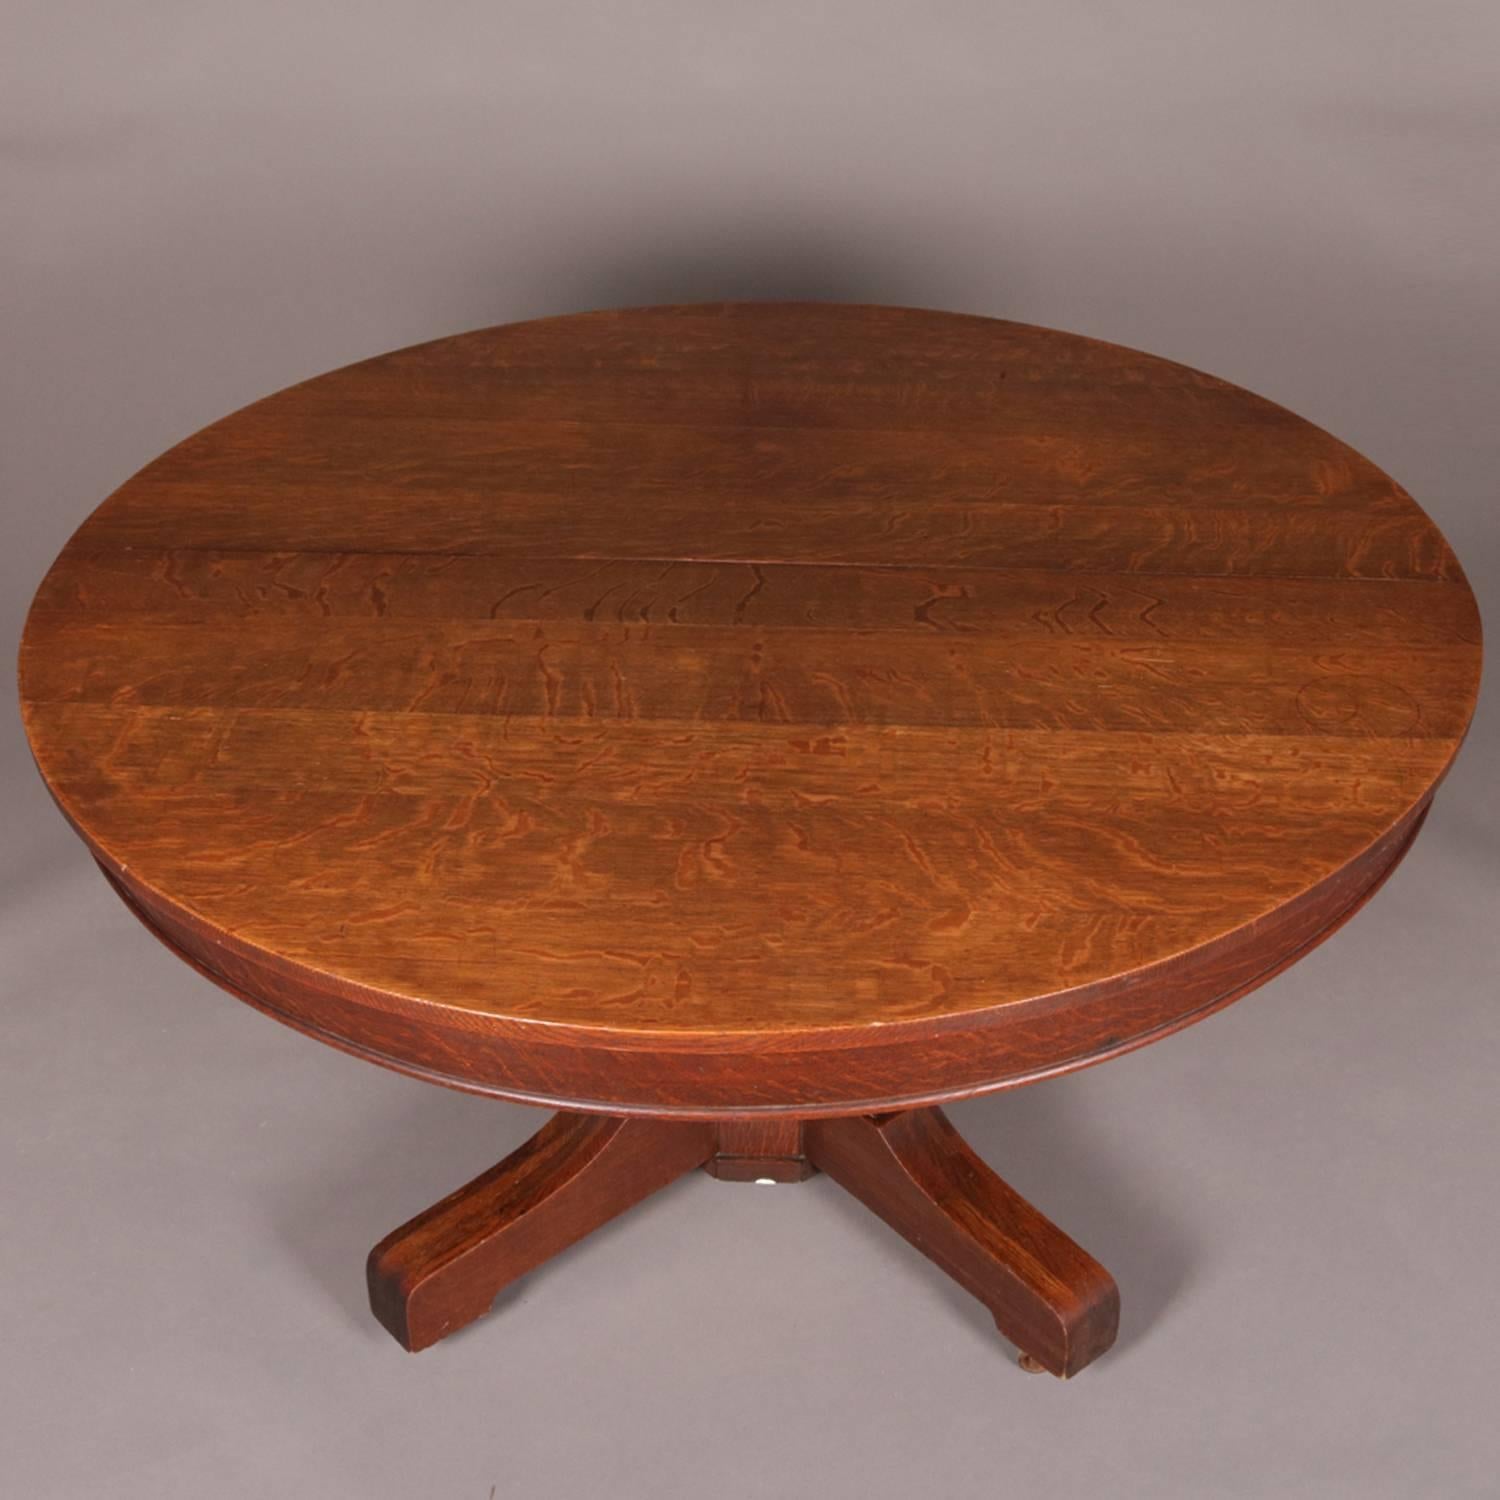 Arts and Crafts Arts & Crafts Mission Oak Hastings Pedestal Dining Table with Leaves, circa 1910